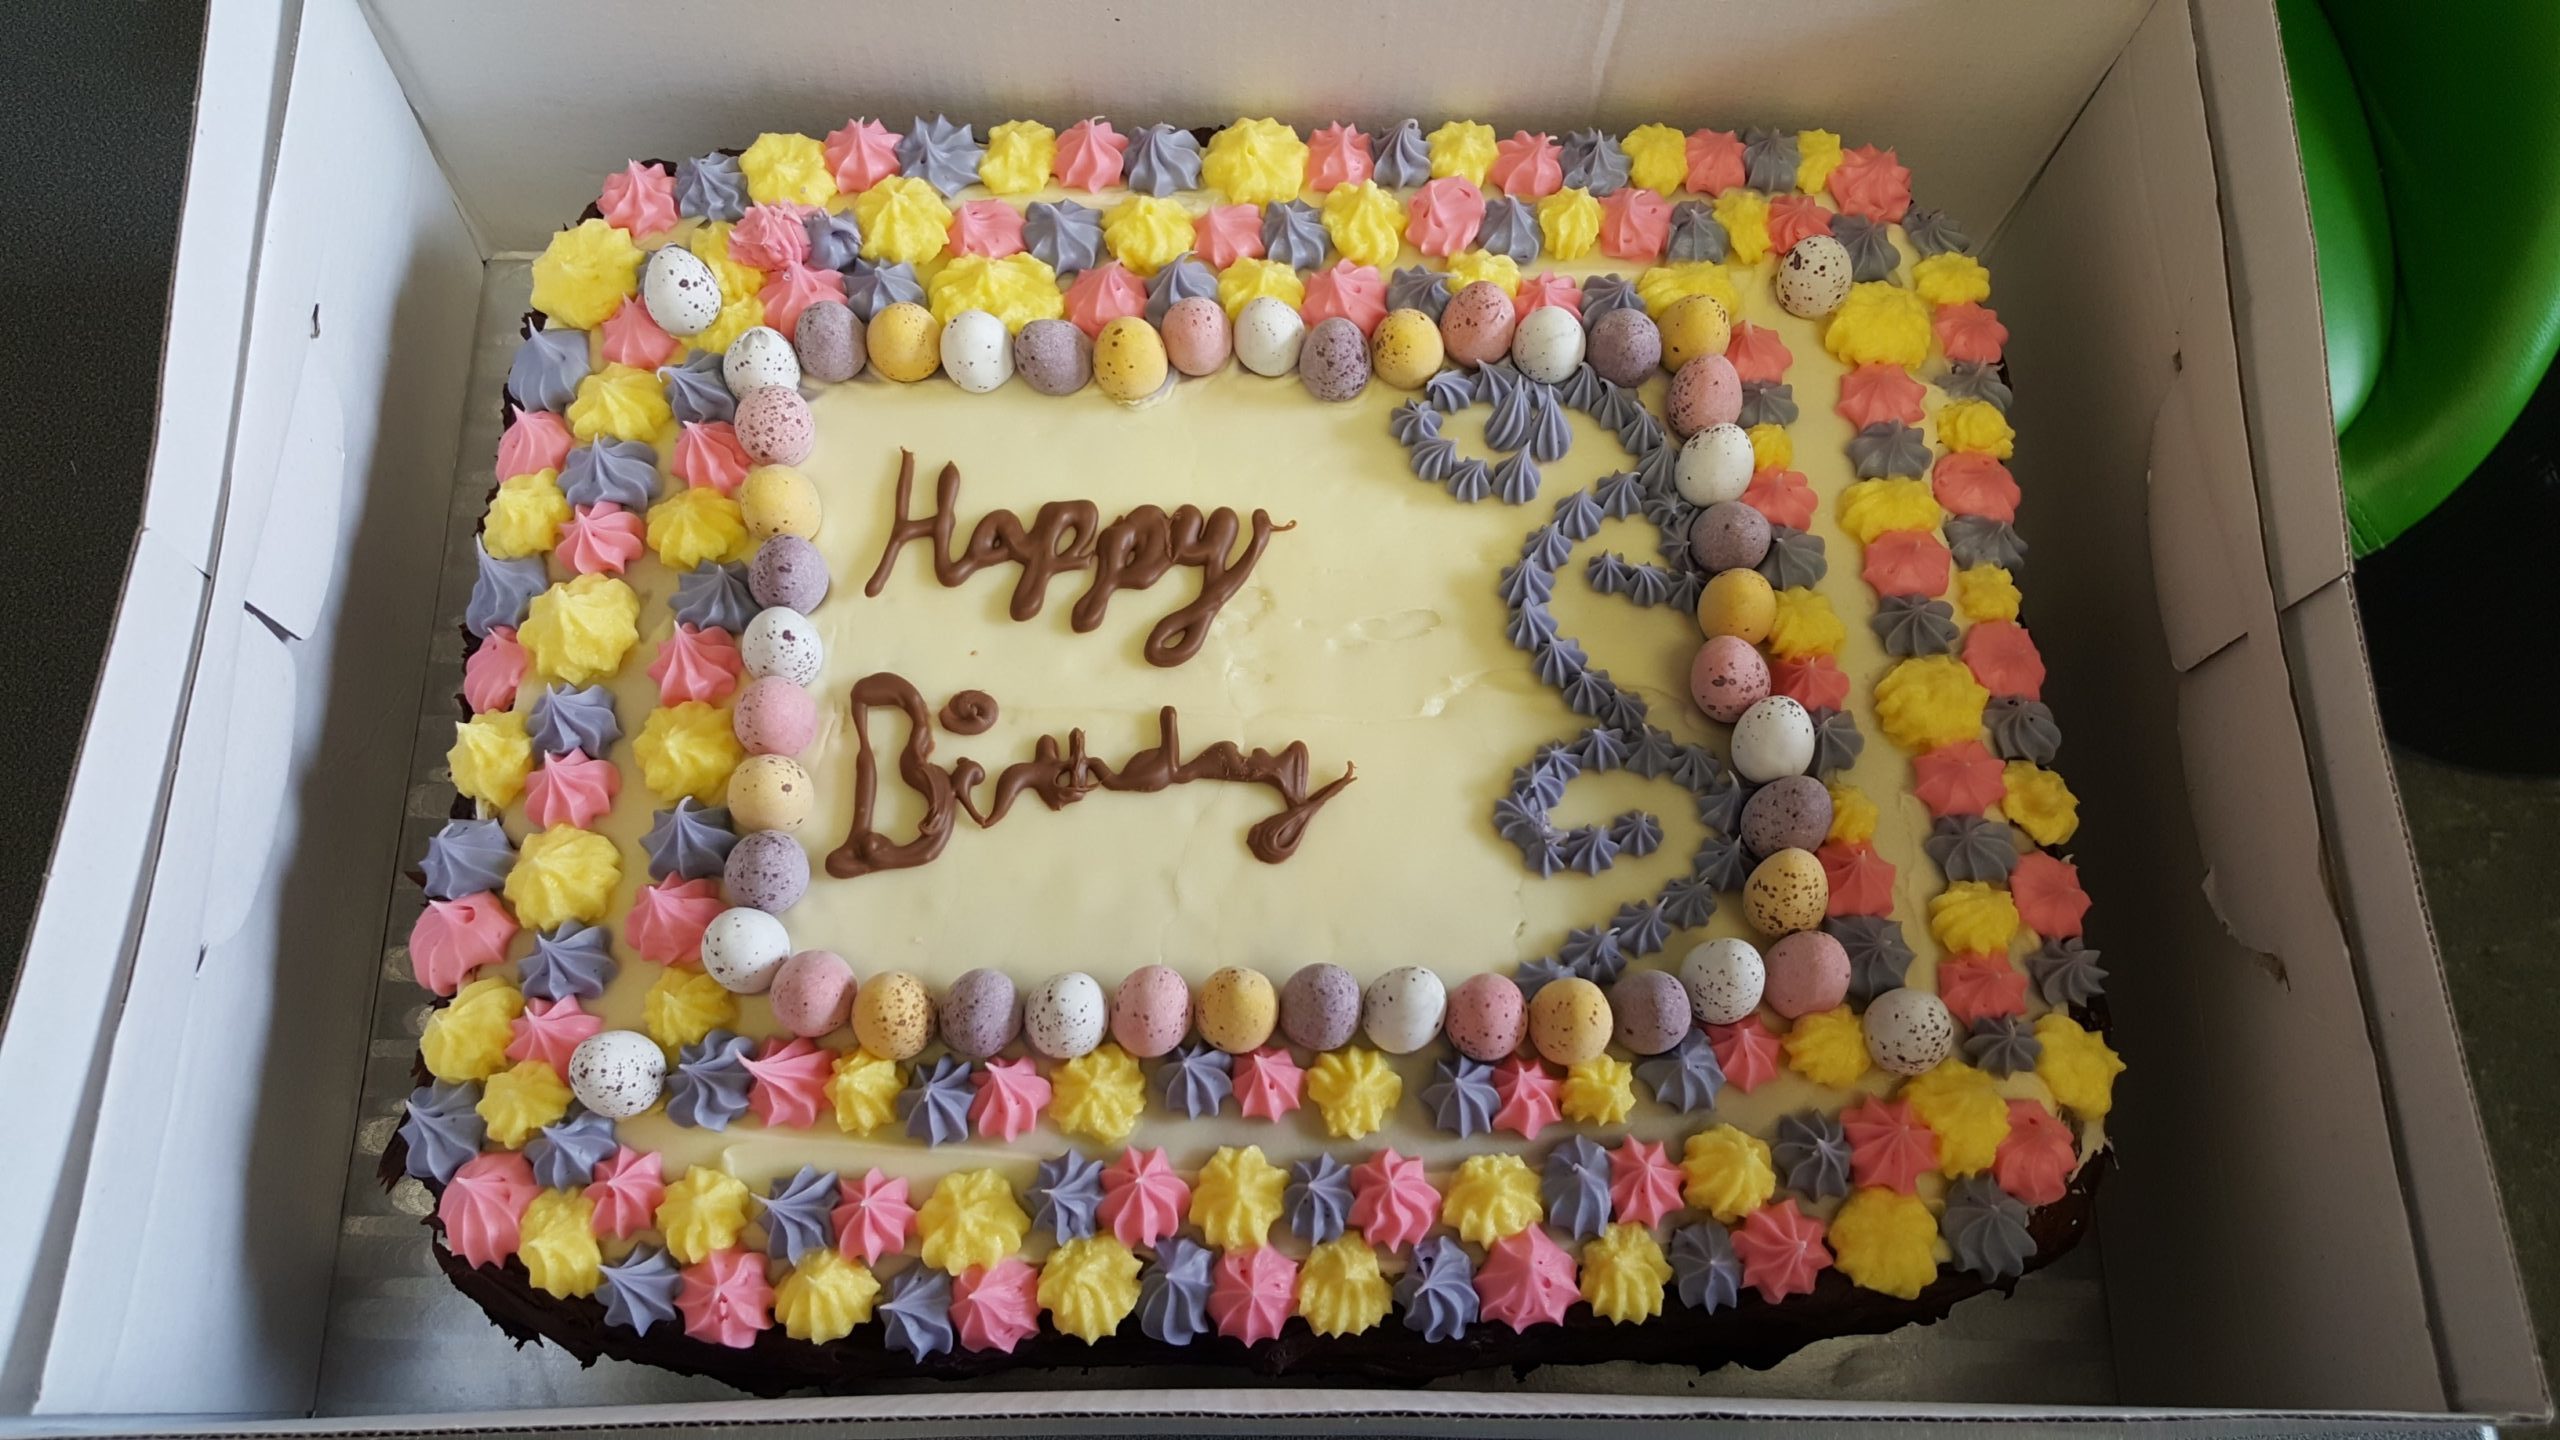 Easter birthday cake - The Great British Bake Off | The Great British ...